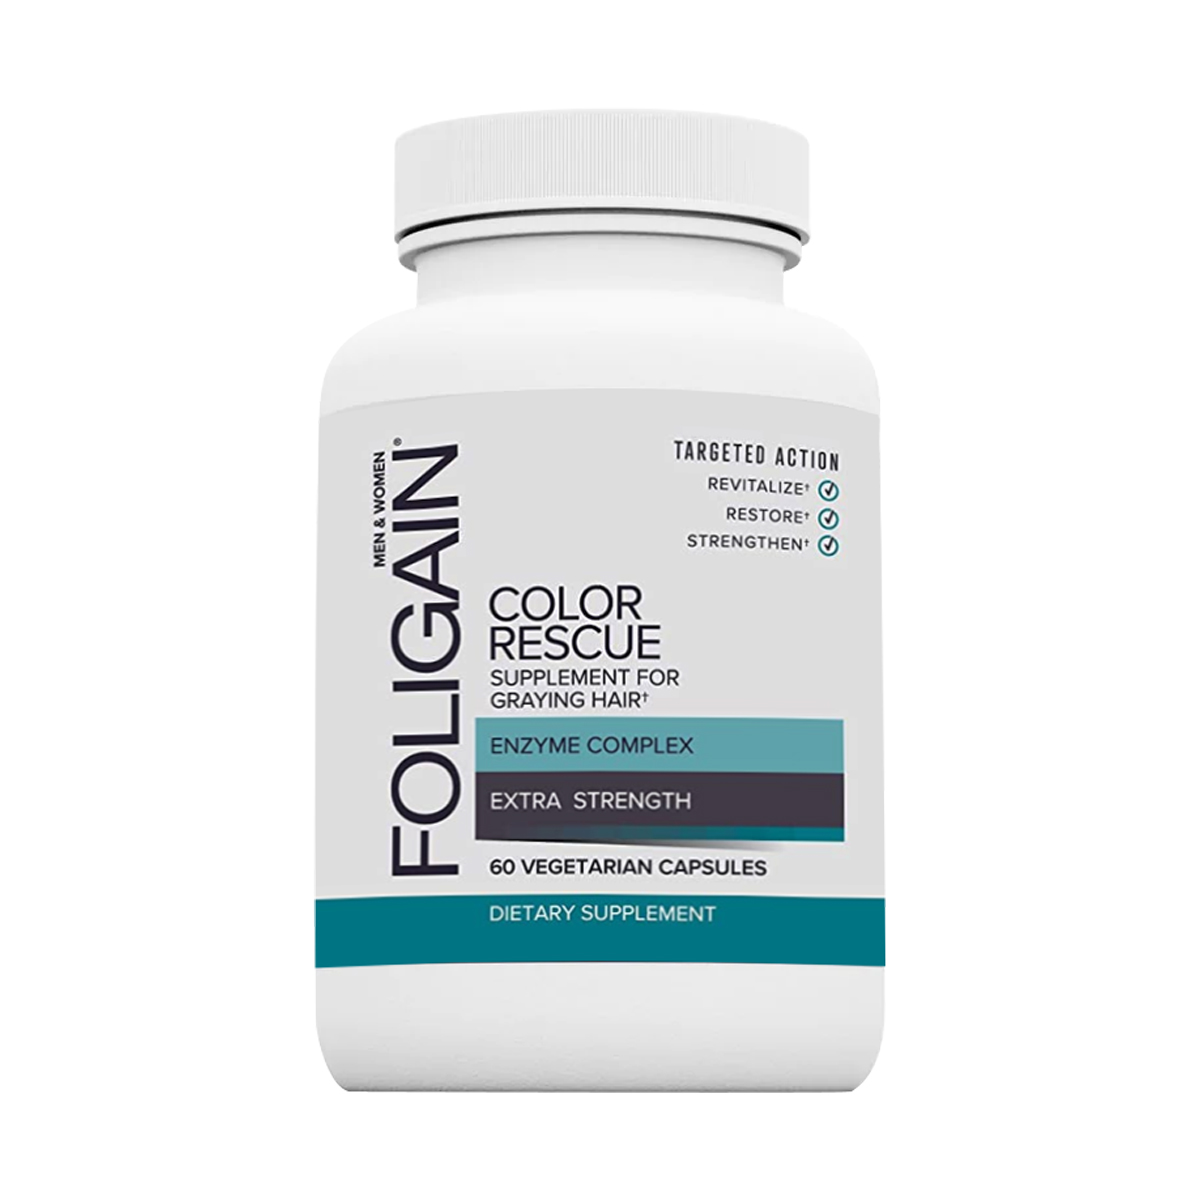 FOLIGAIN®  Color Rescue Supplement For Graying Hair / 60 Vegetarian Capsules